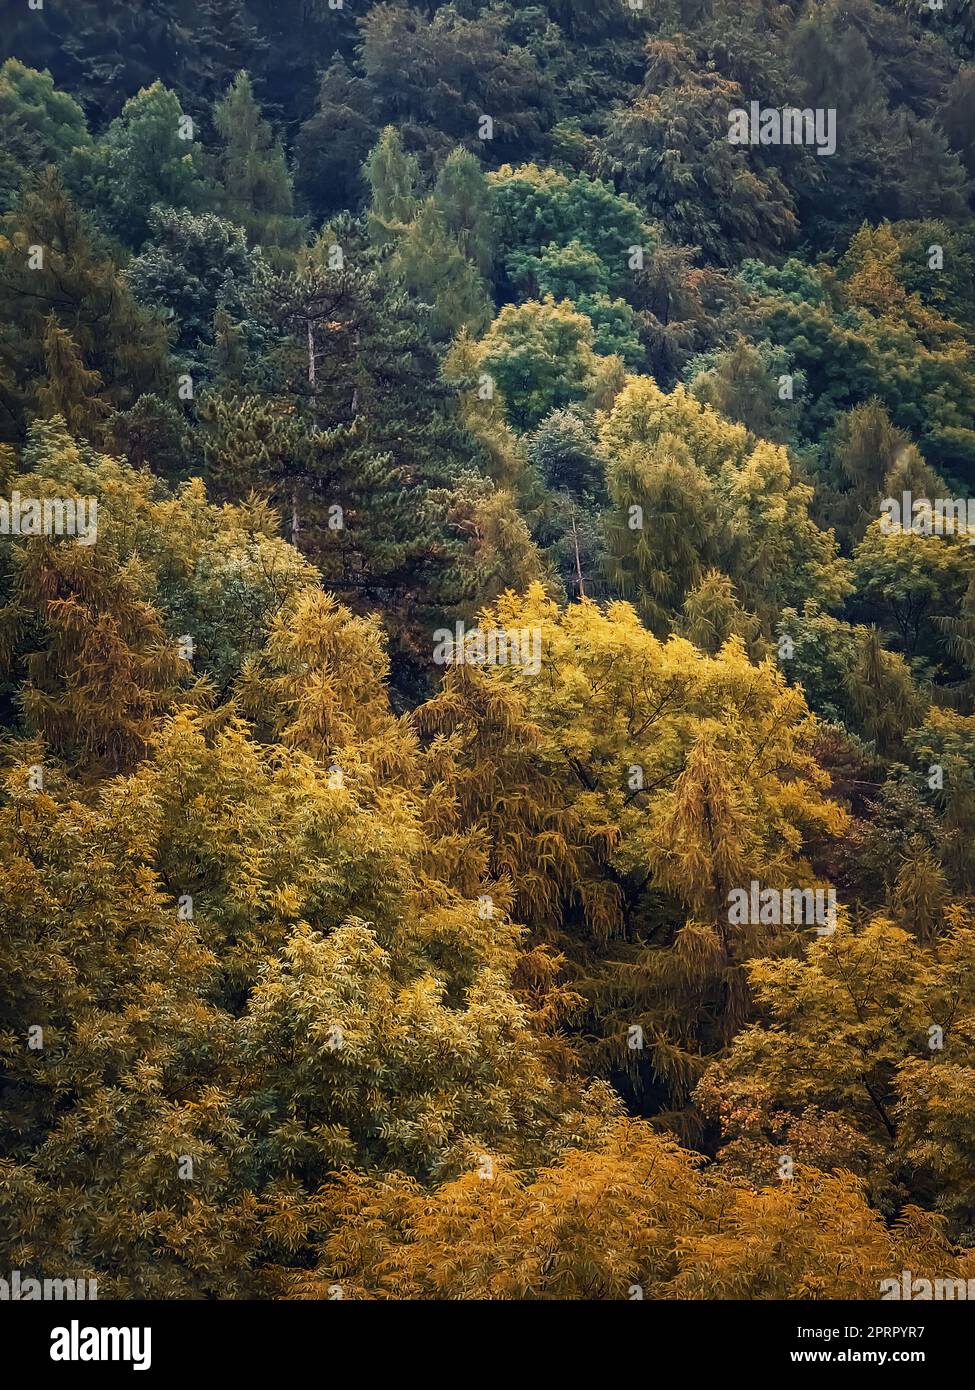 Colorful autumn trees texture. Natural scene of a forest with different colored leaves, fall season vertical background Stock Photo